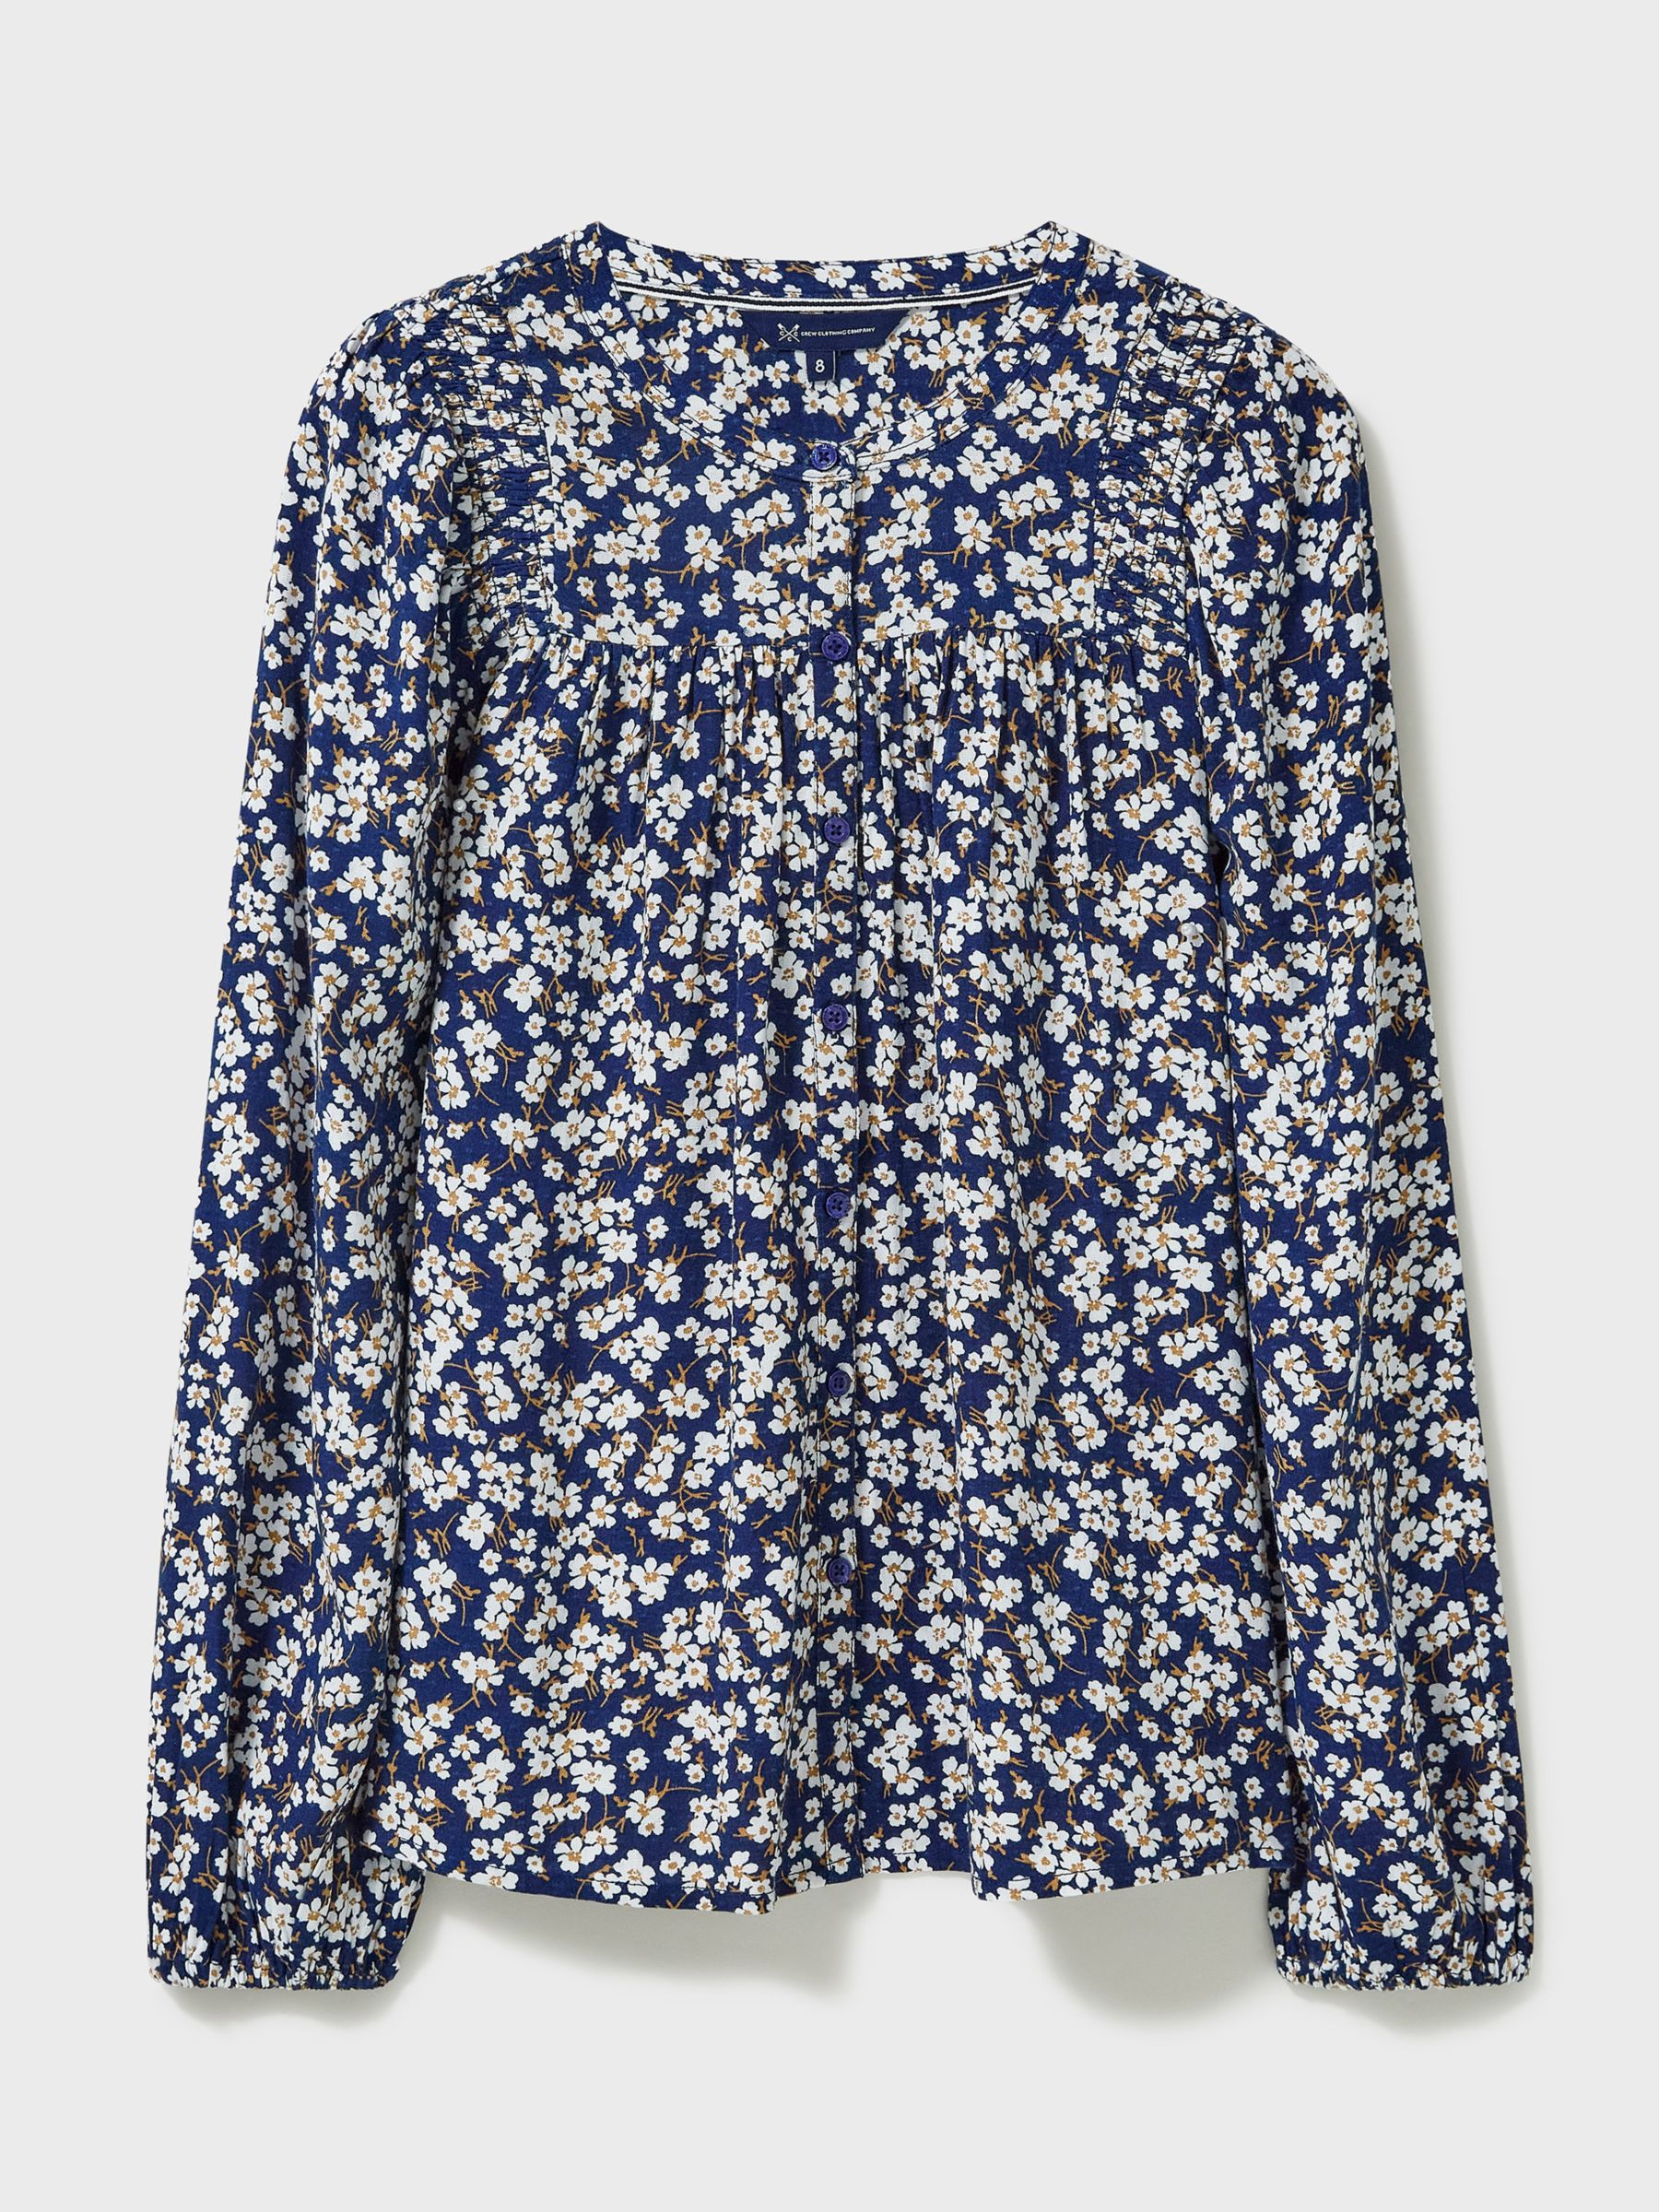 Buy Crew Clothing Floral Print Blouse, Navy Blue Online at johnlewis.com